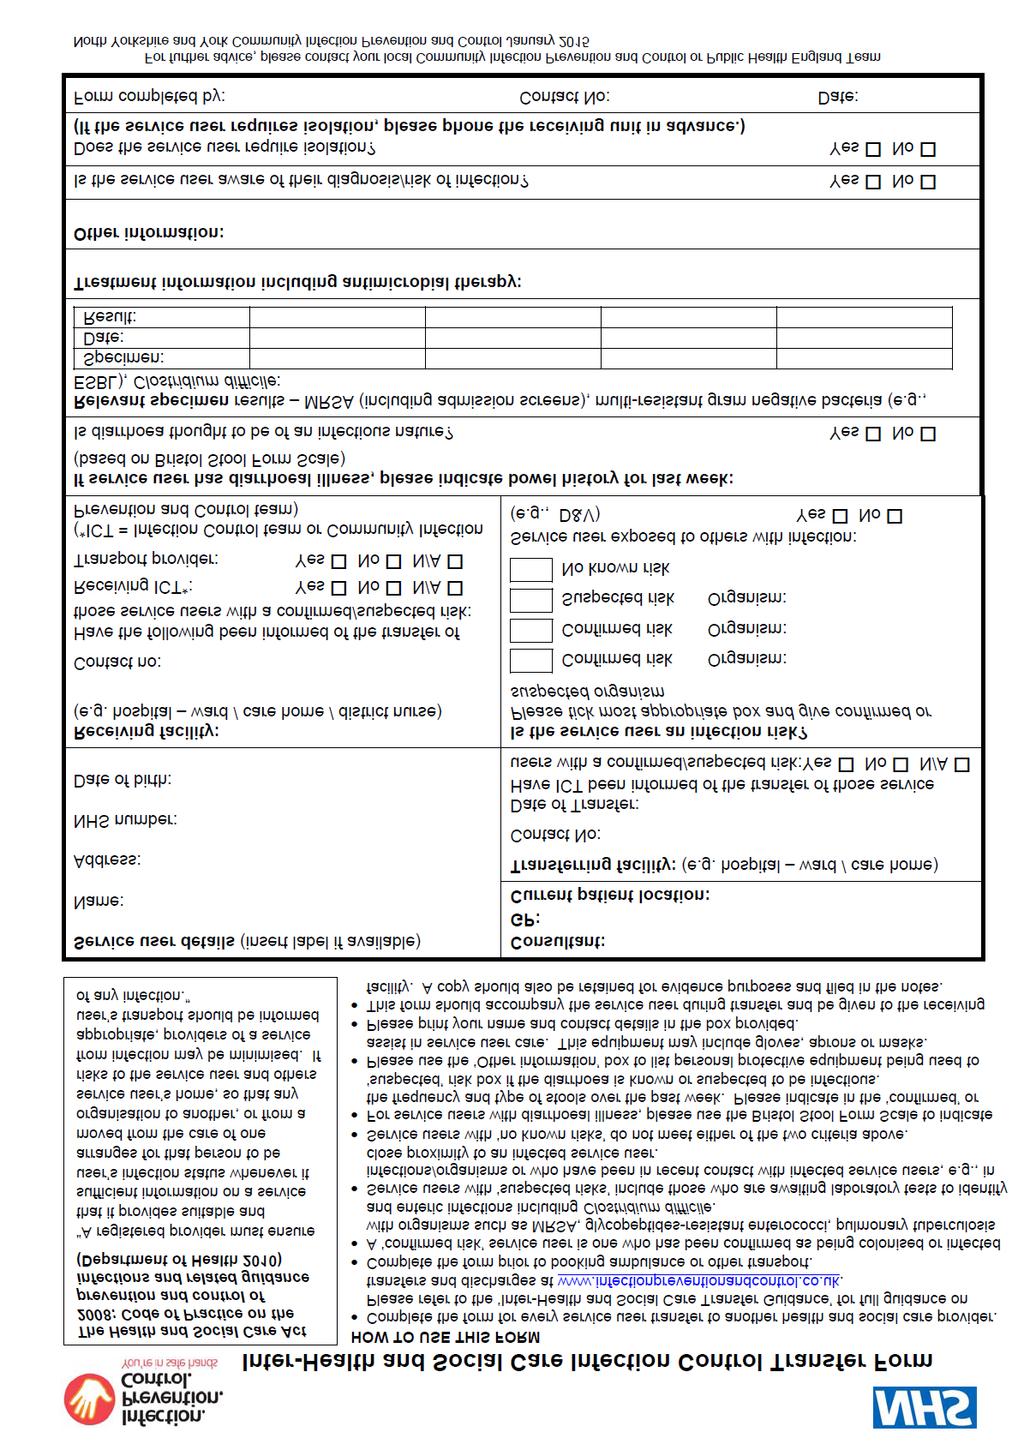 Appendix 2: Inter-Health and Social Care Infection Control Transfer Form 16